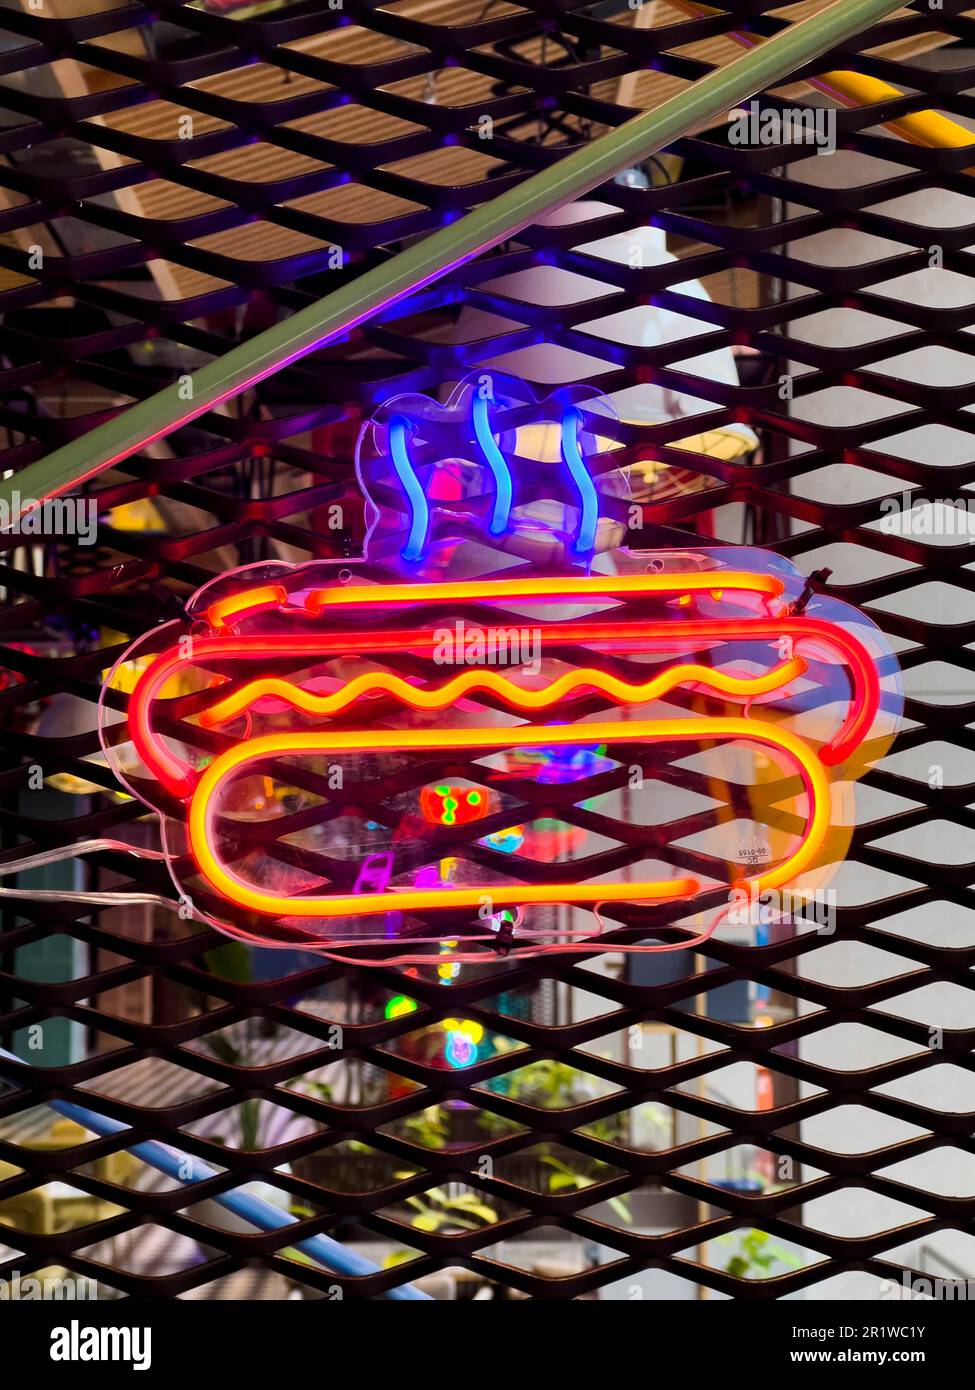 Illuminated Hot Dog. Bright colored collection of symbols or sign boards glowing with colorful neon light for cafe, restaurant, motel or cocktail bar. Stock Photo